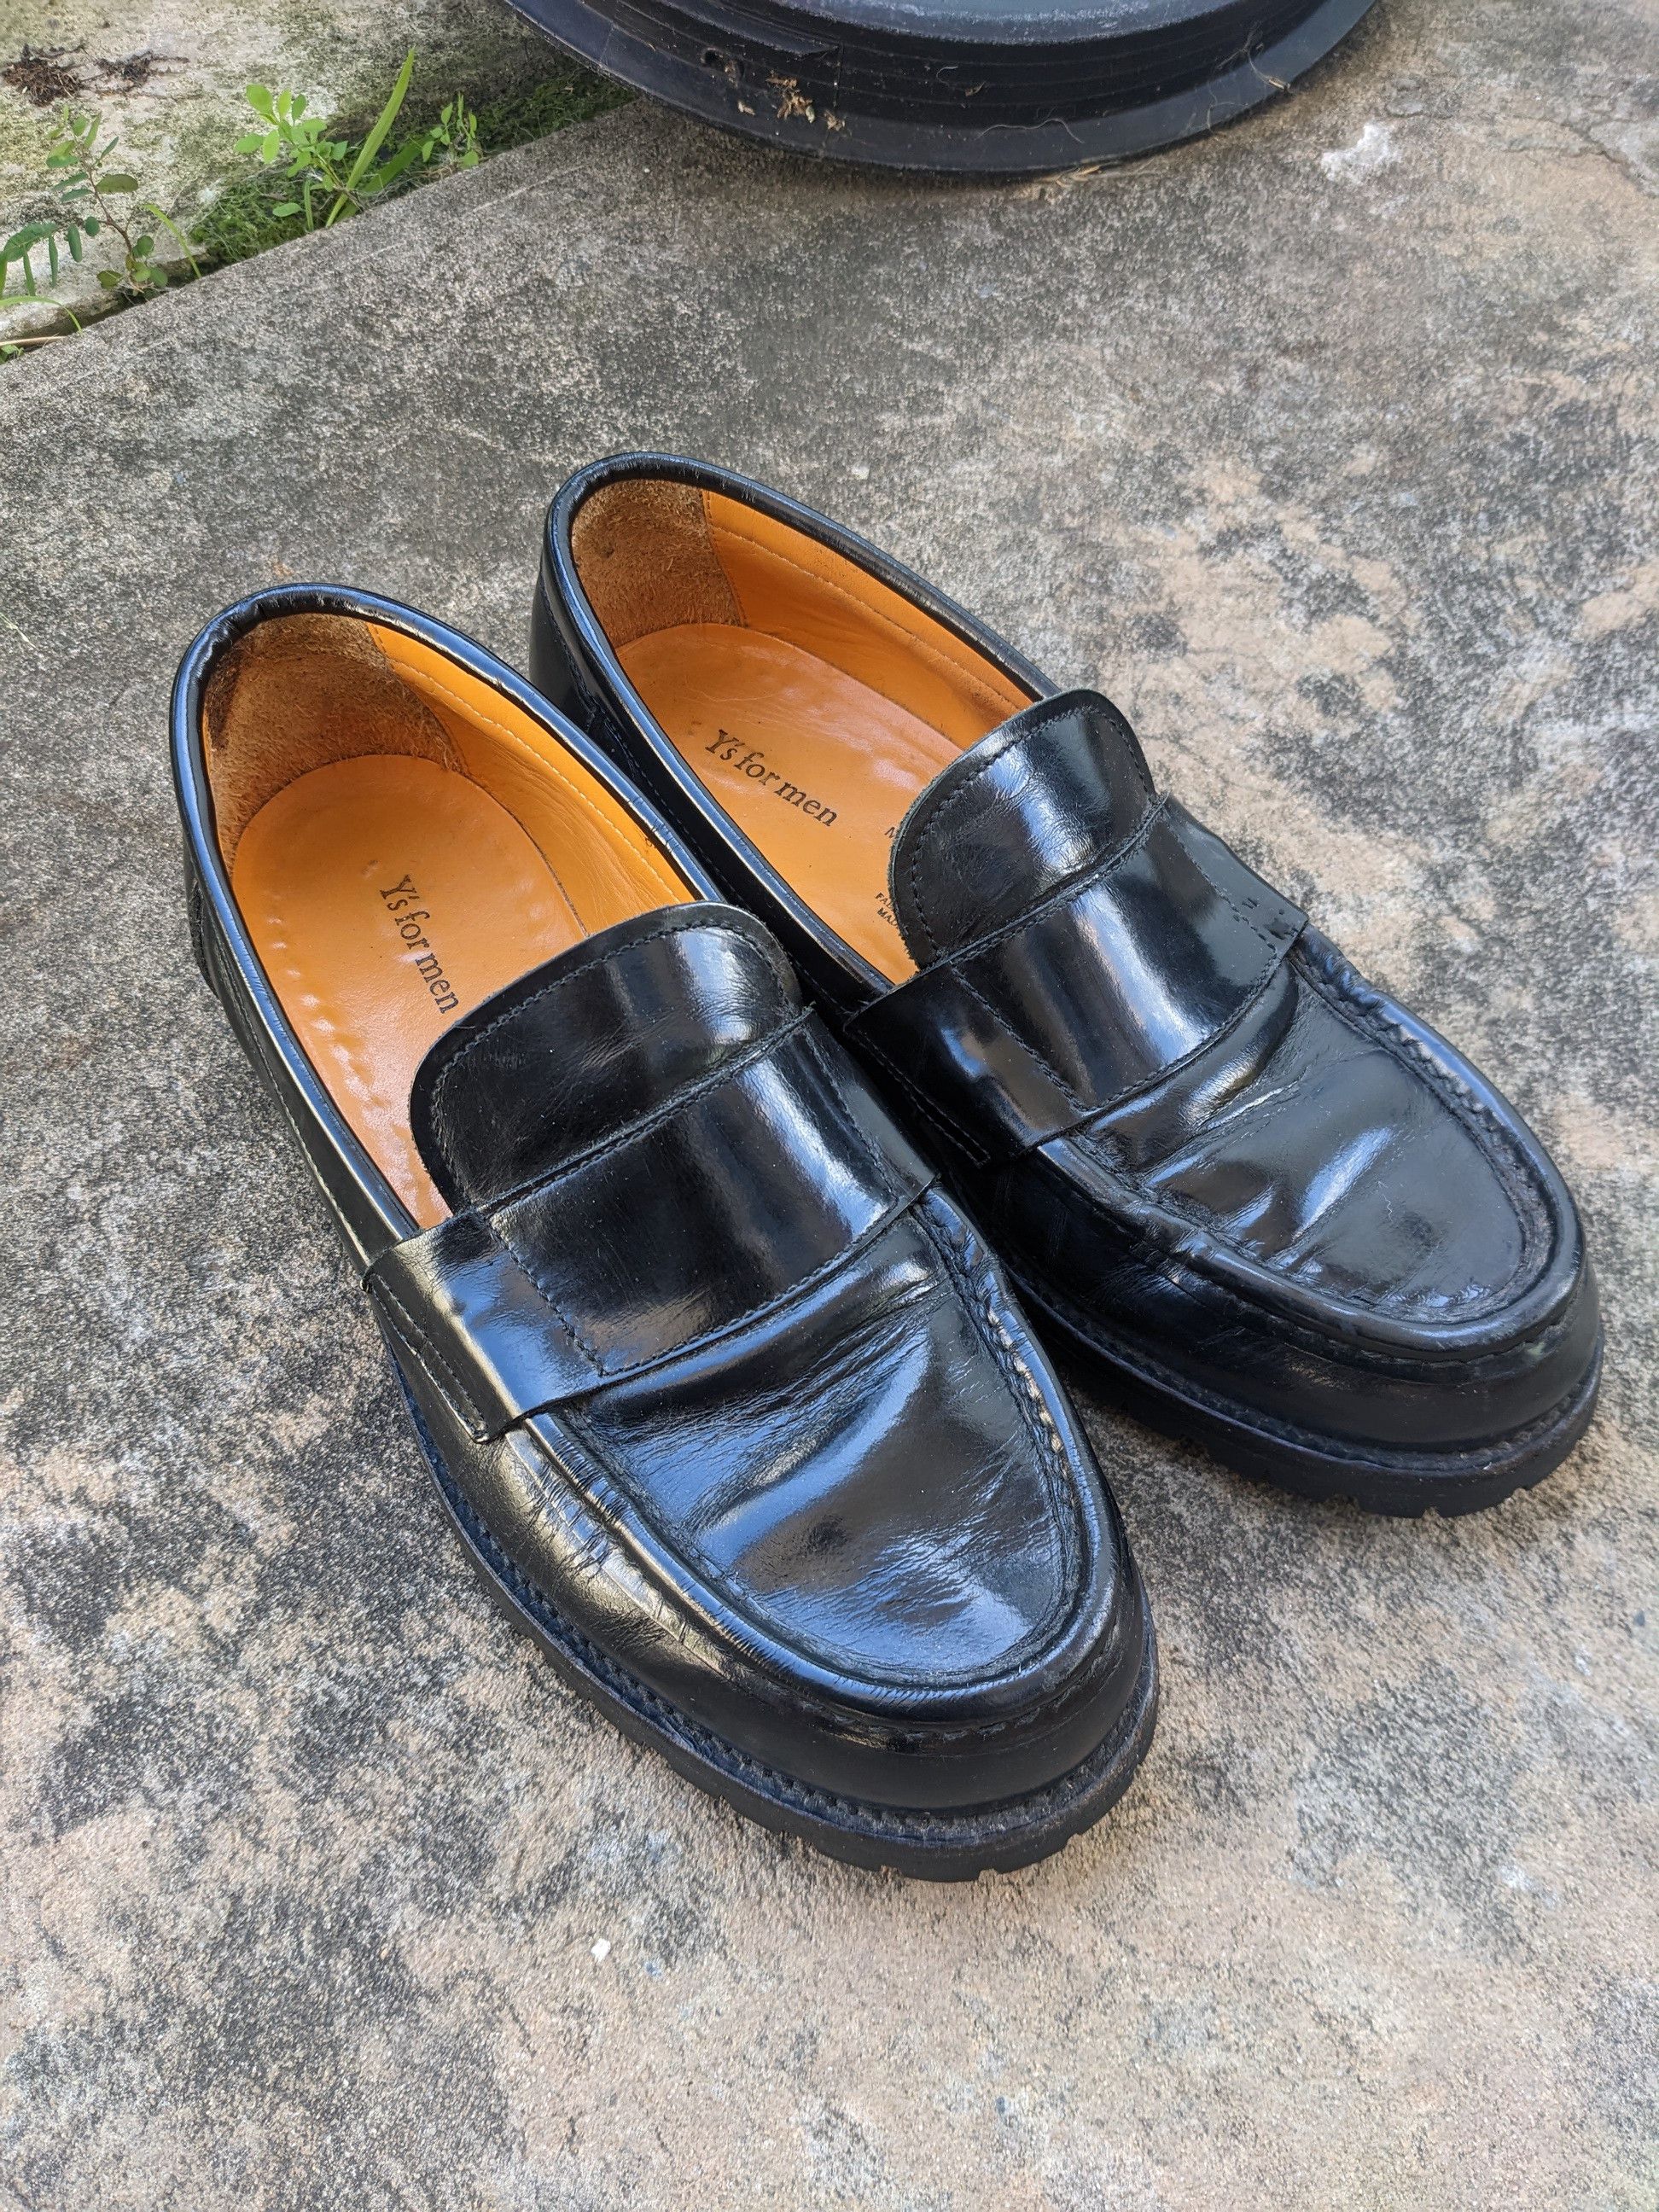 Yohji Yamamoto Y's For Men leather loafers | Grailed